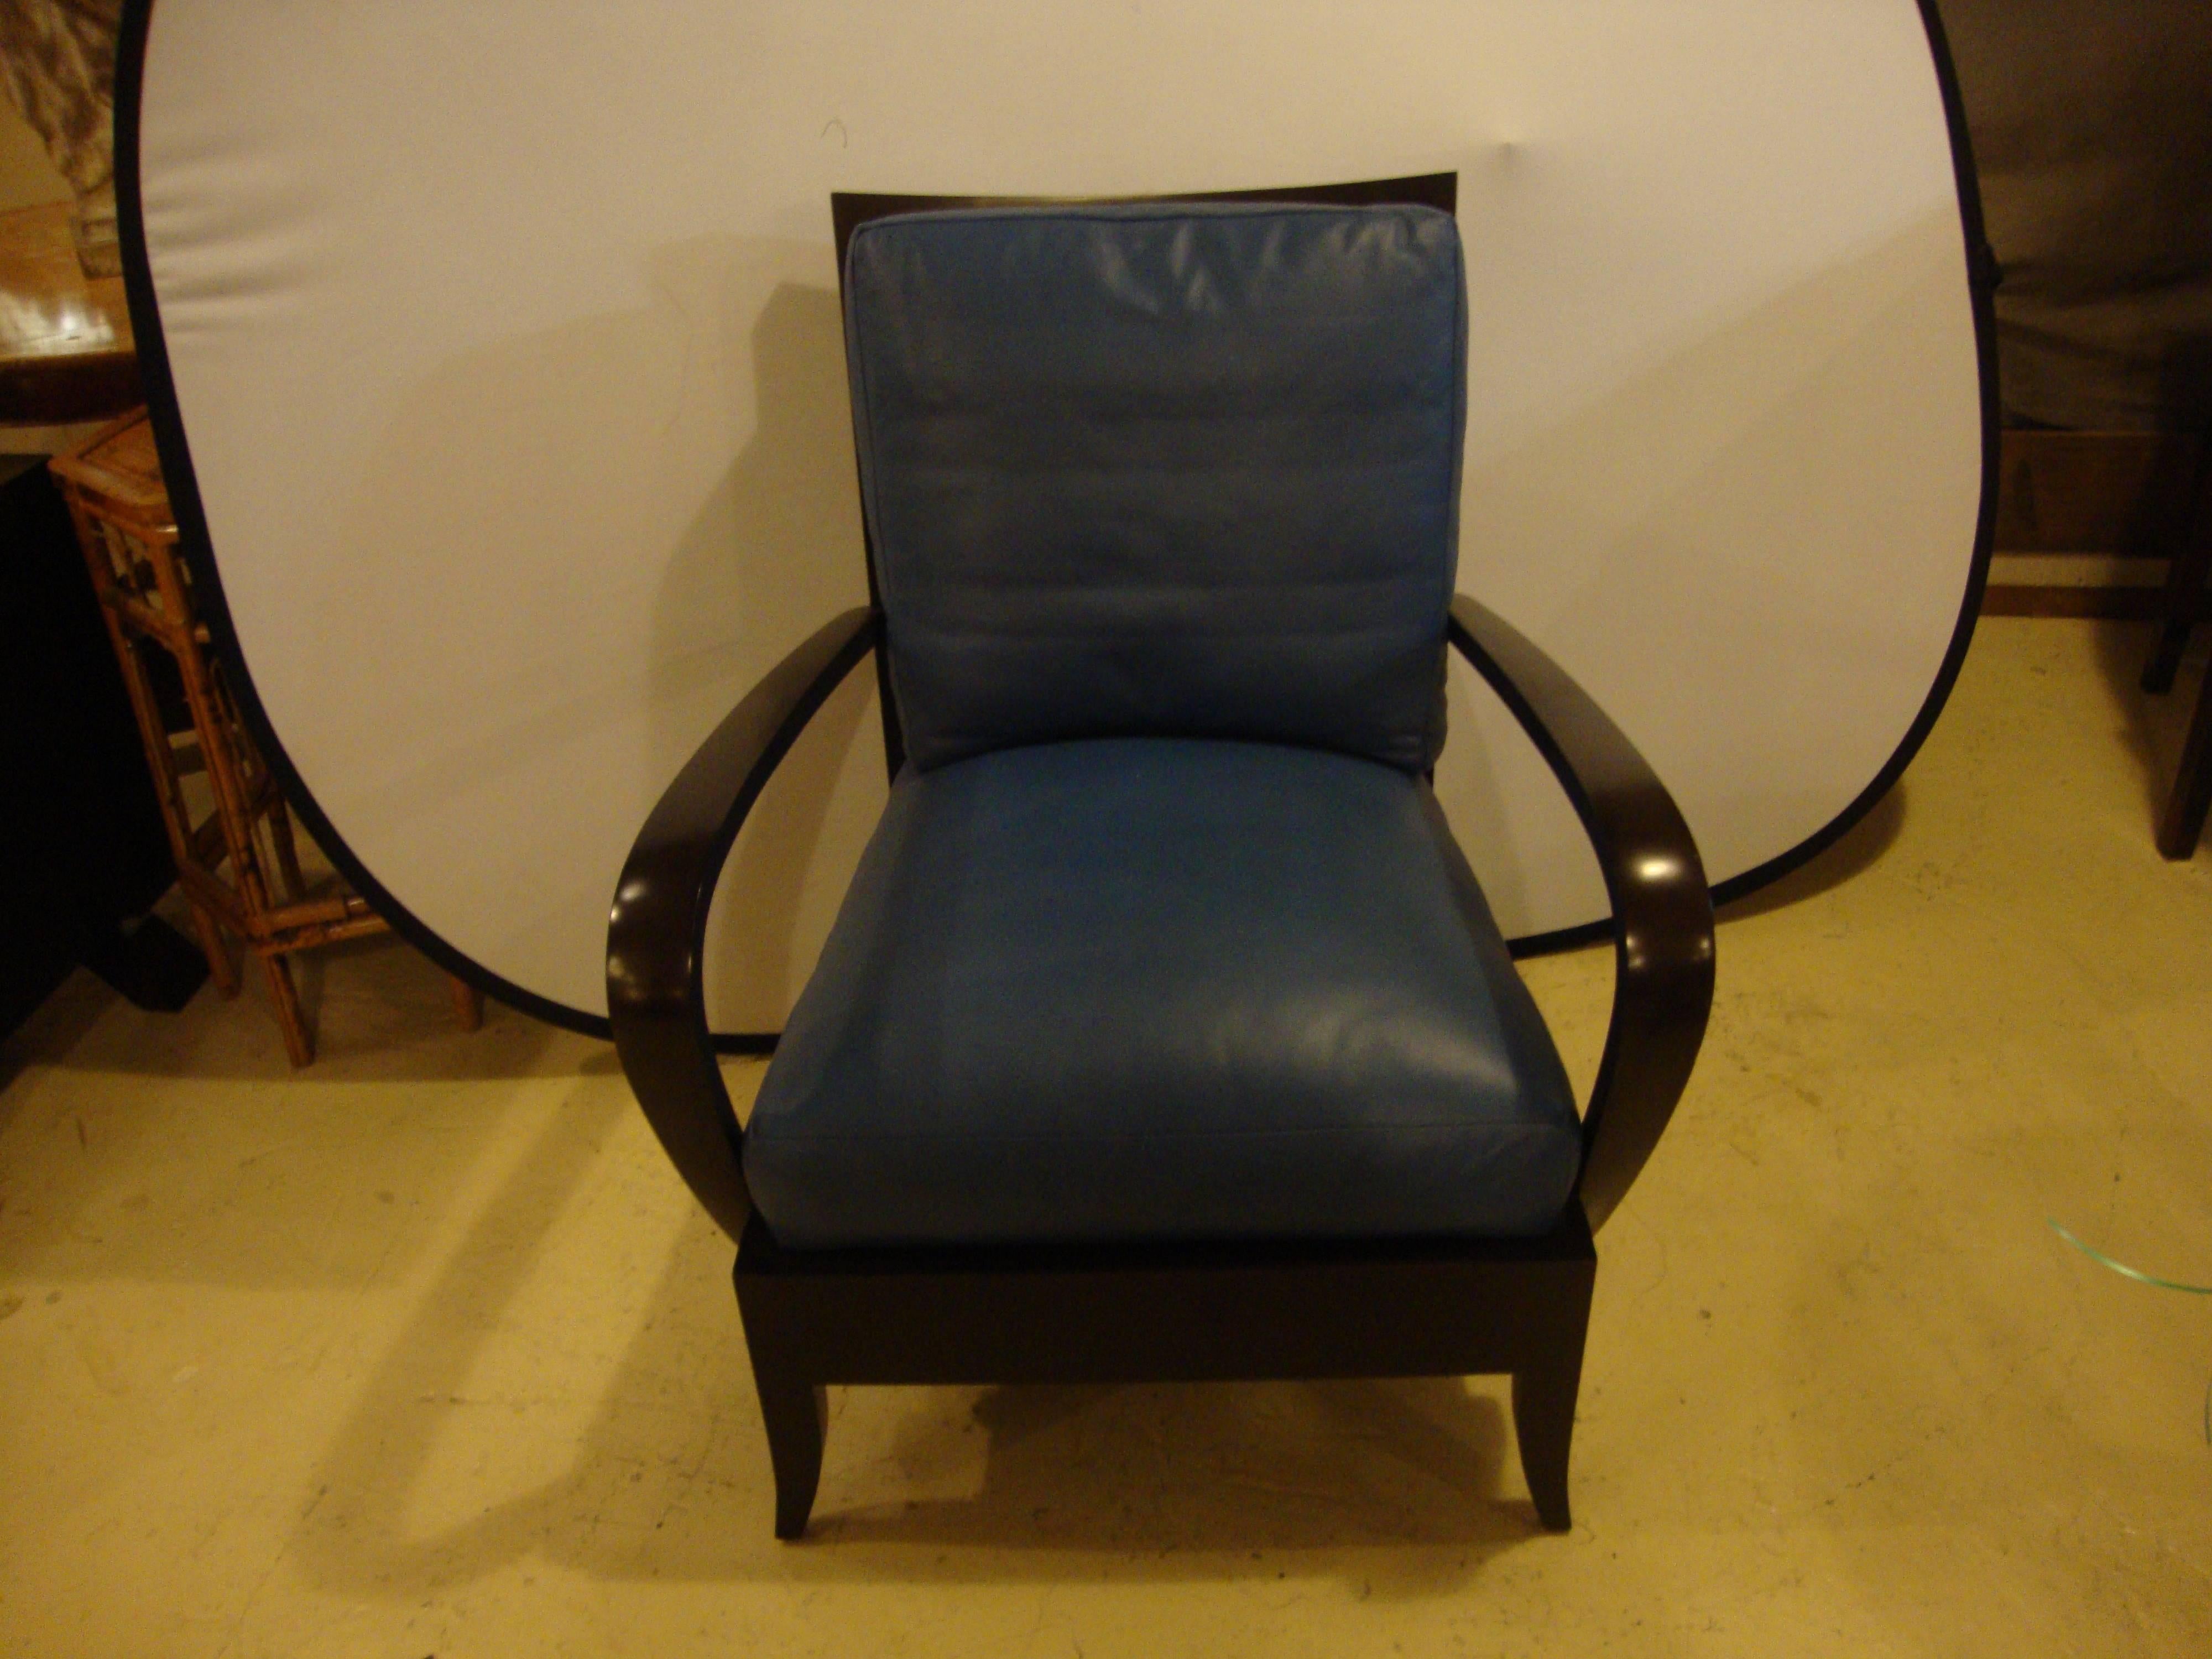 Dakota Jackson fine leather, celeste blue arm lounge chair. One of several Jackson pieces from the same estate this comfortable lounge chair show why this highly sought after designer is so popular. The sleek and sharp lines flow wonderfully and